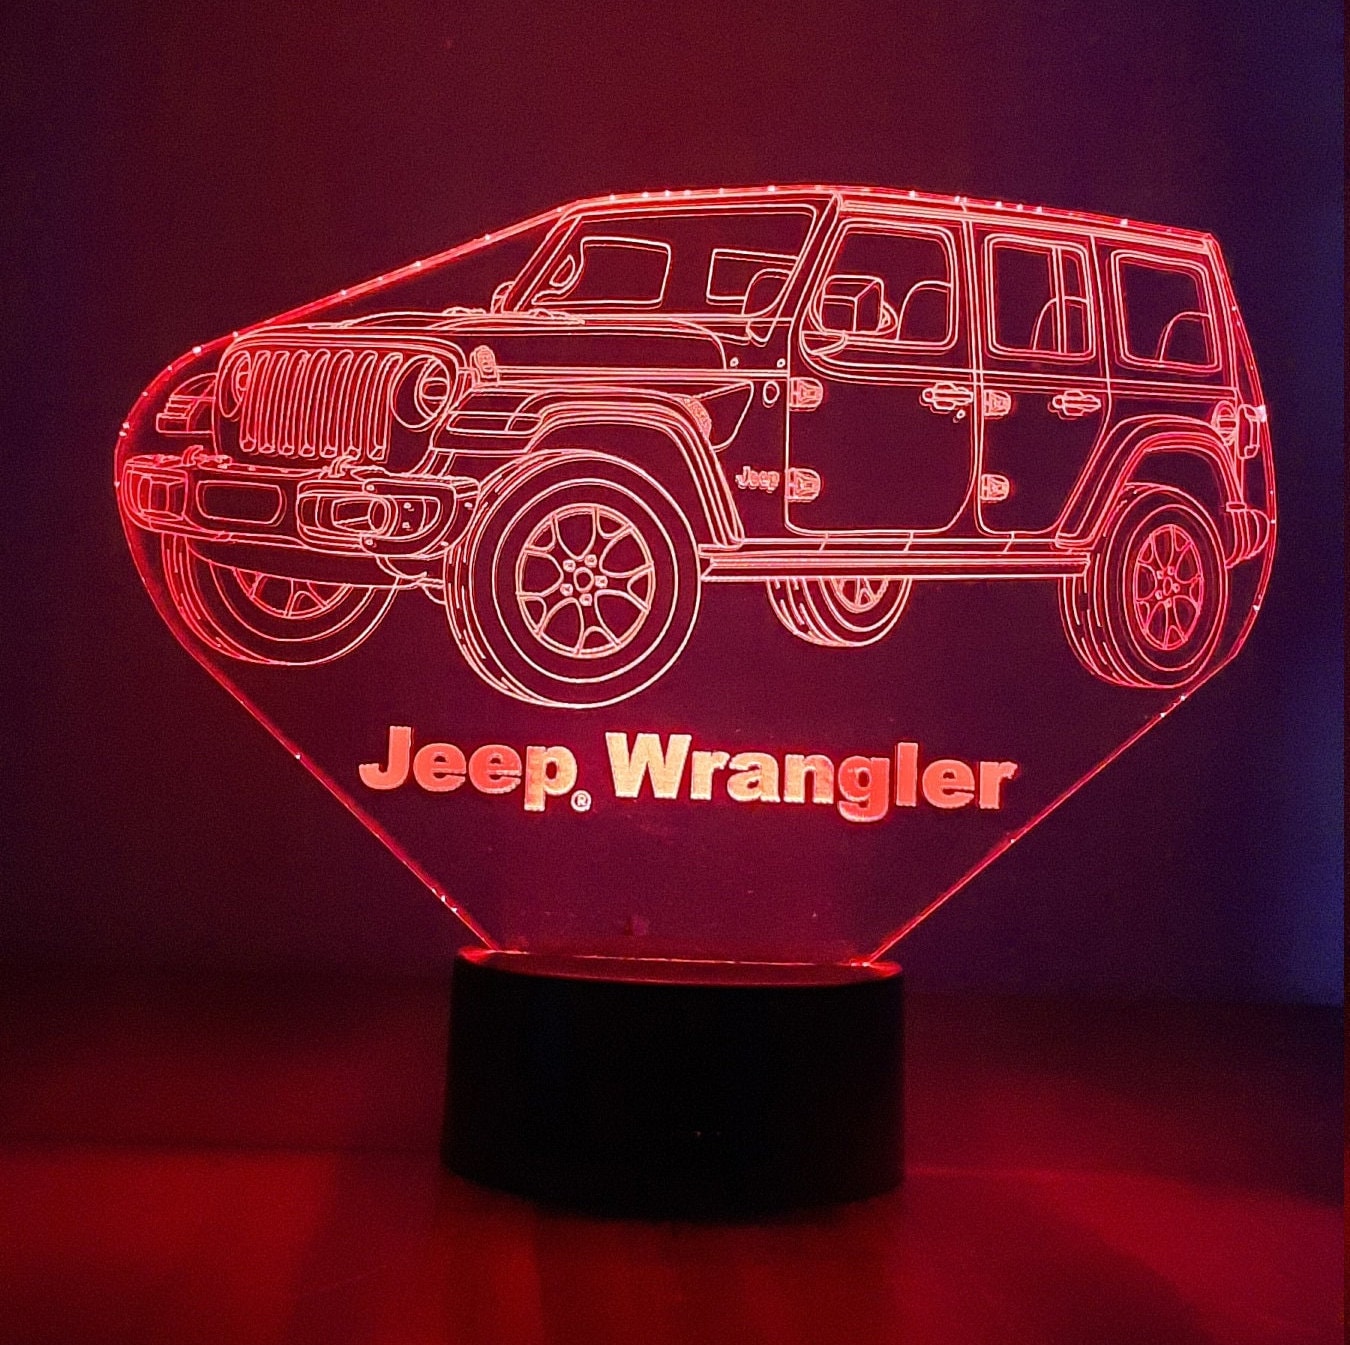 Awesome "Jeep Wrangler" 3D LED lamp (1282) - FREE SHIPPING!